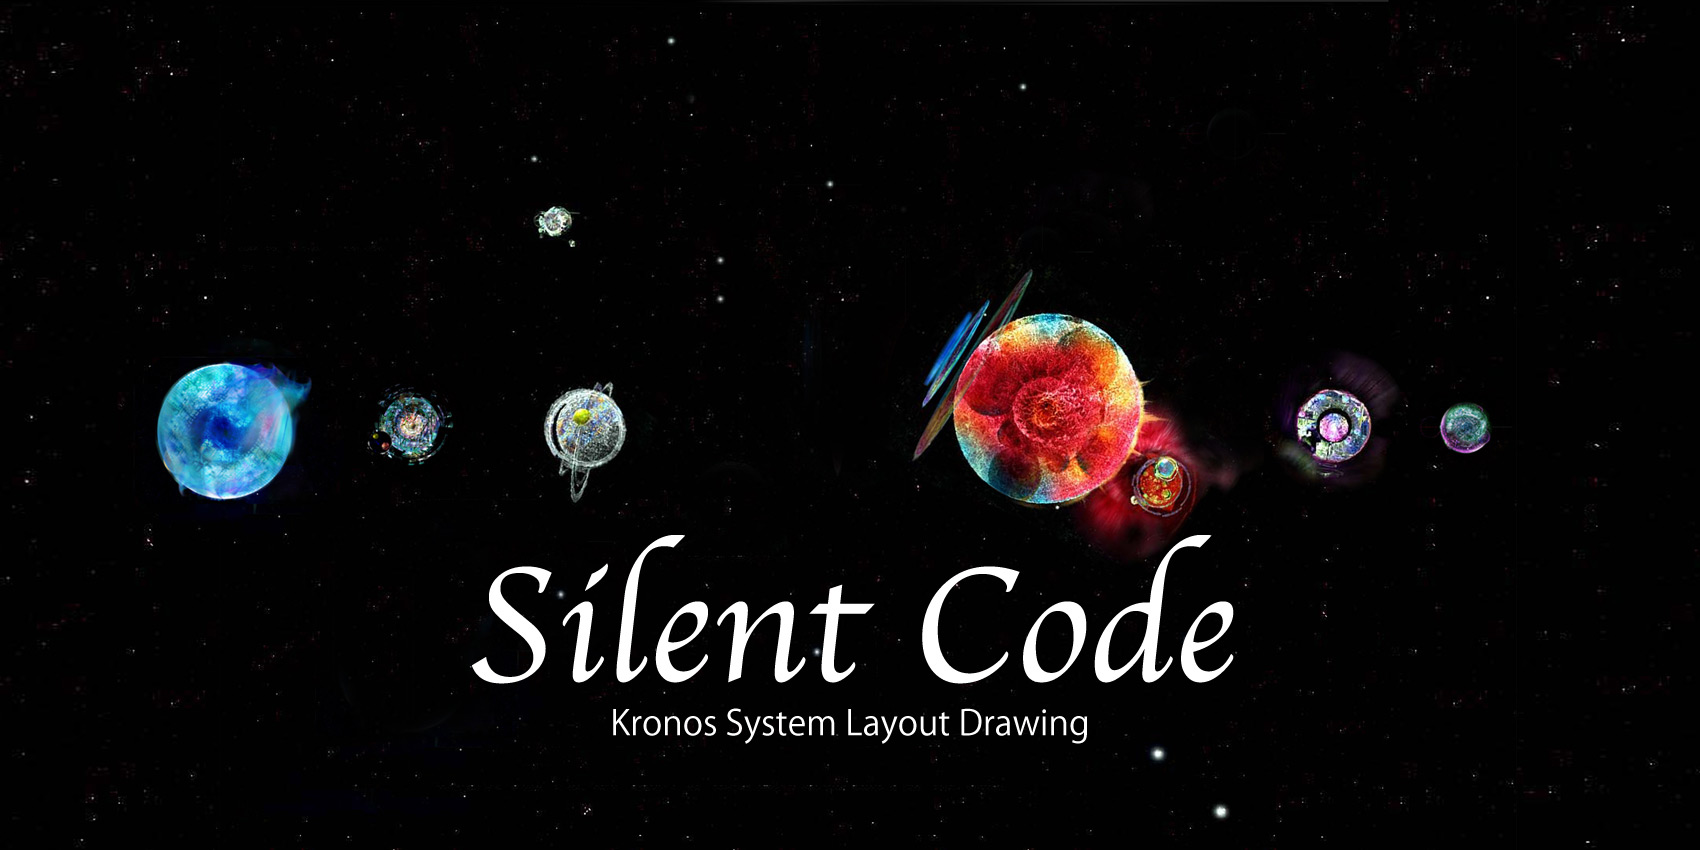 Silent Code - Kronos System Layout Drawing